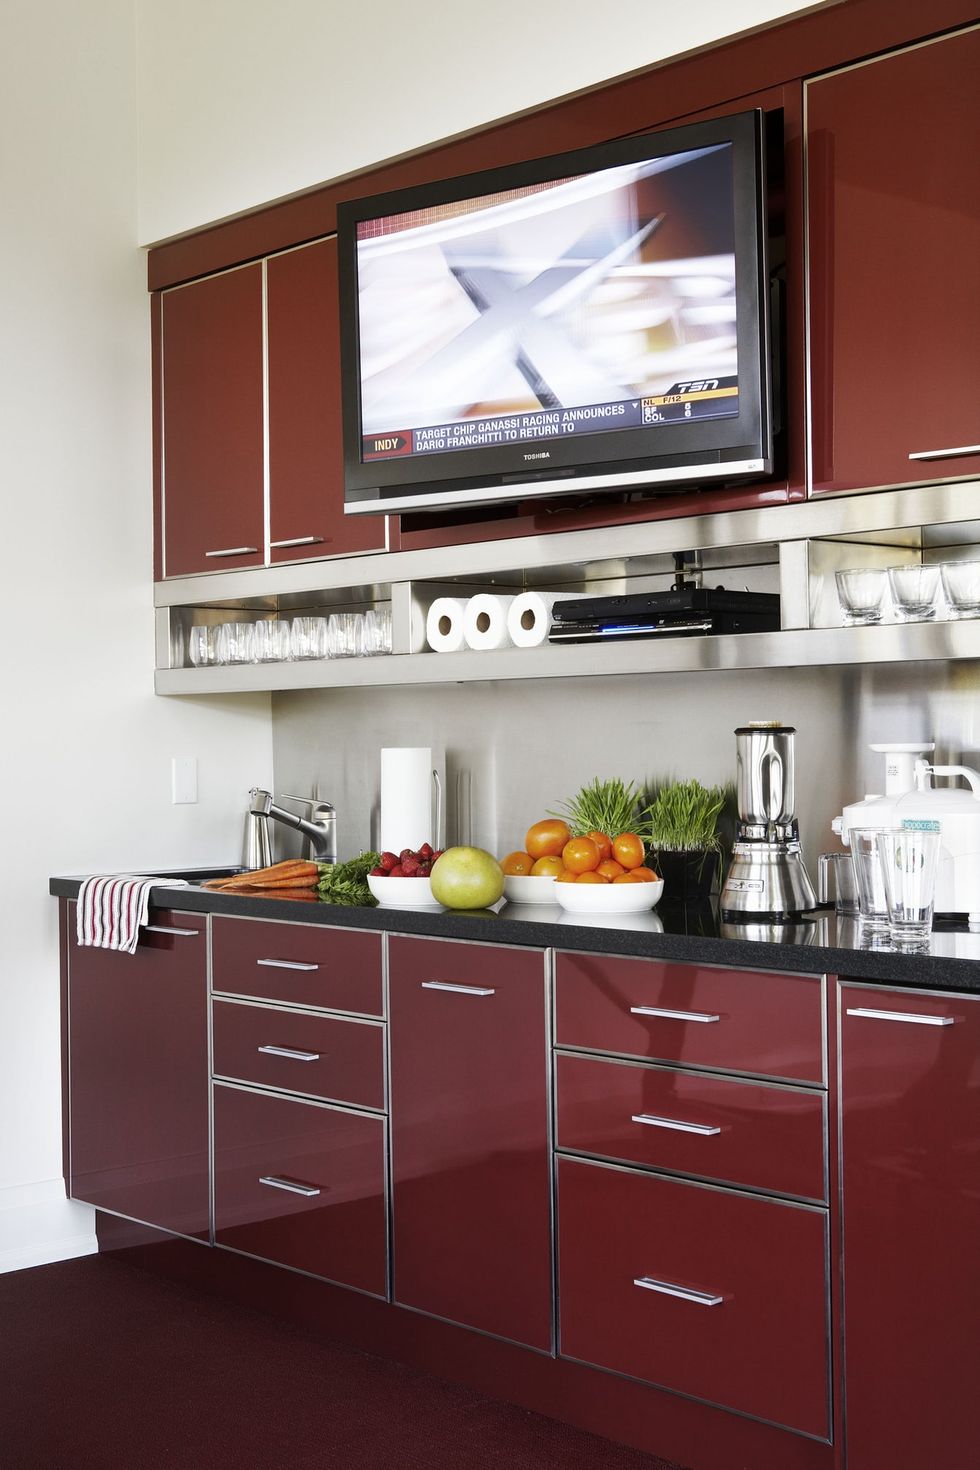 https://hips.hearstapps.com/hmg-prod/images/hbu-red-kitchen-red-cabinets-dering-hall-1510937603.jpg?crop=0.9997517994539589xw:1xh;center,top&resize=980:*